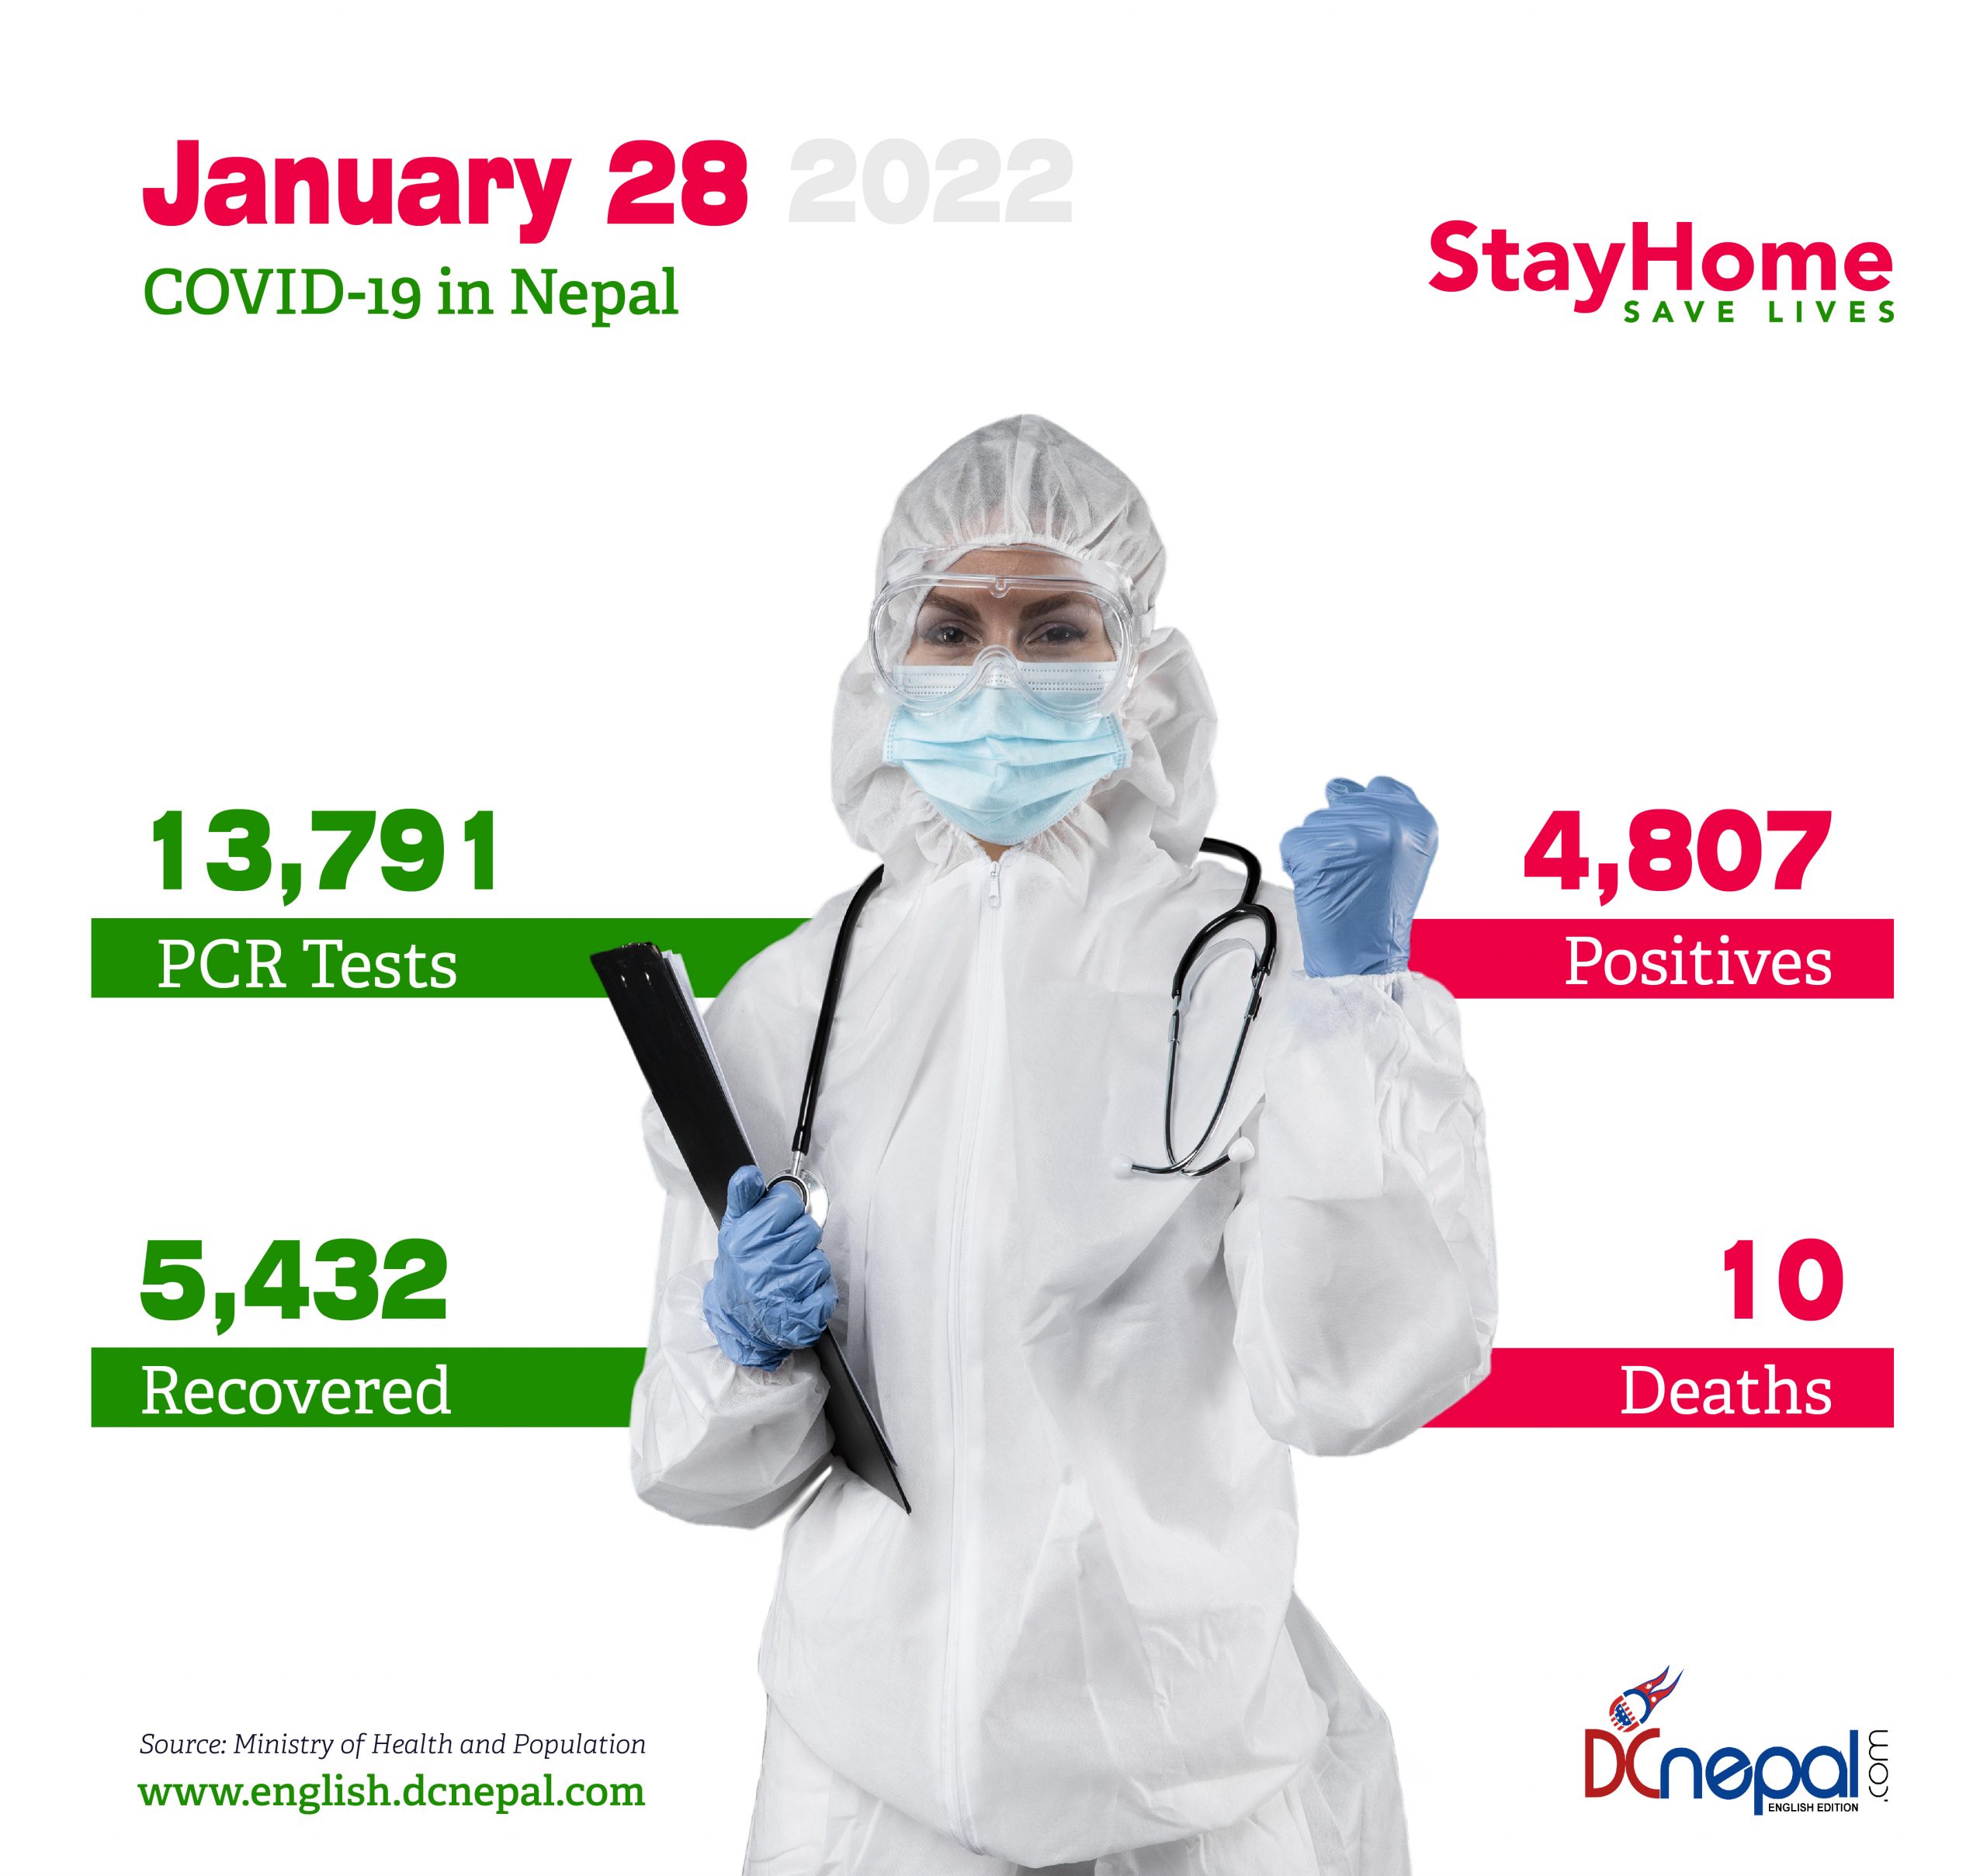 90 thousand active cases of COVID-19 in Nepal today; 54 thousand in Kathmandu valley